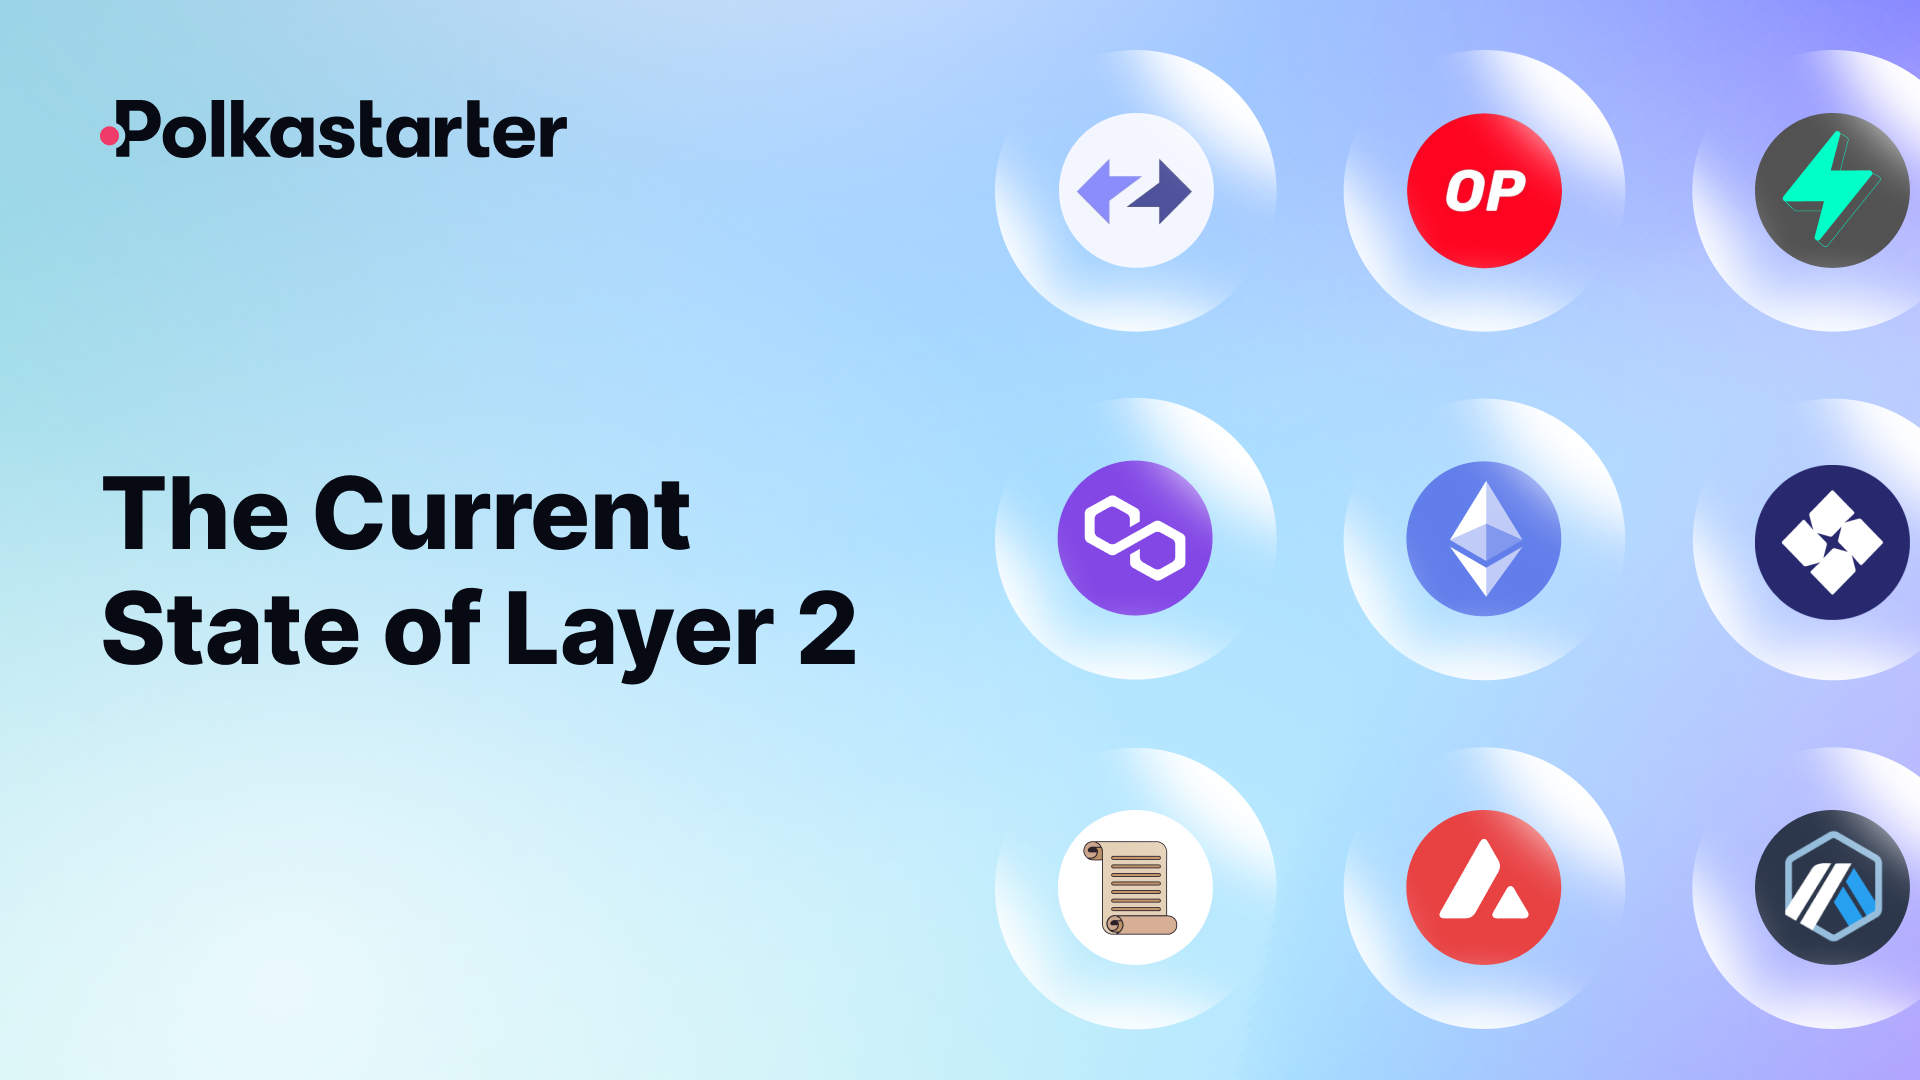 The Current State of Layer 2